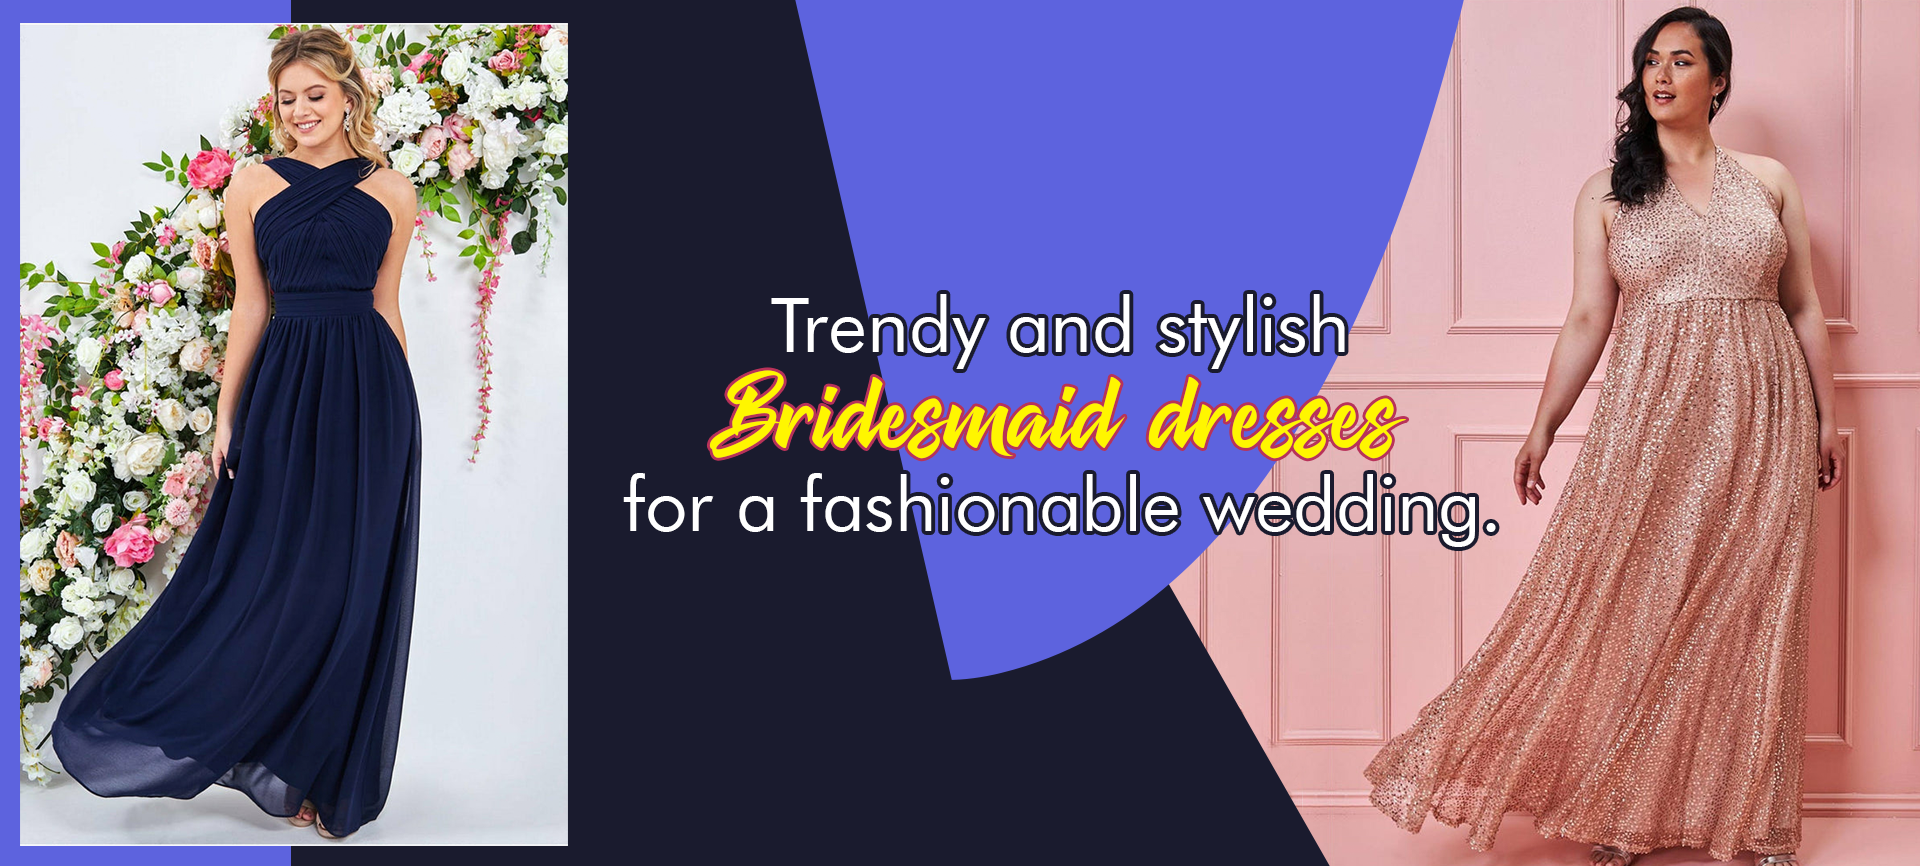 Trendy and stylish bridesmaid dresses for a fashionable wedding.